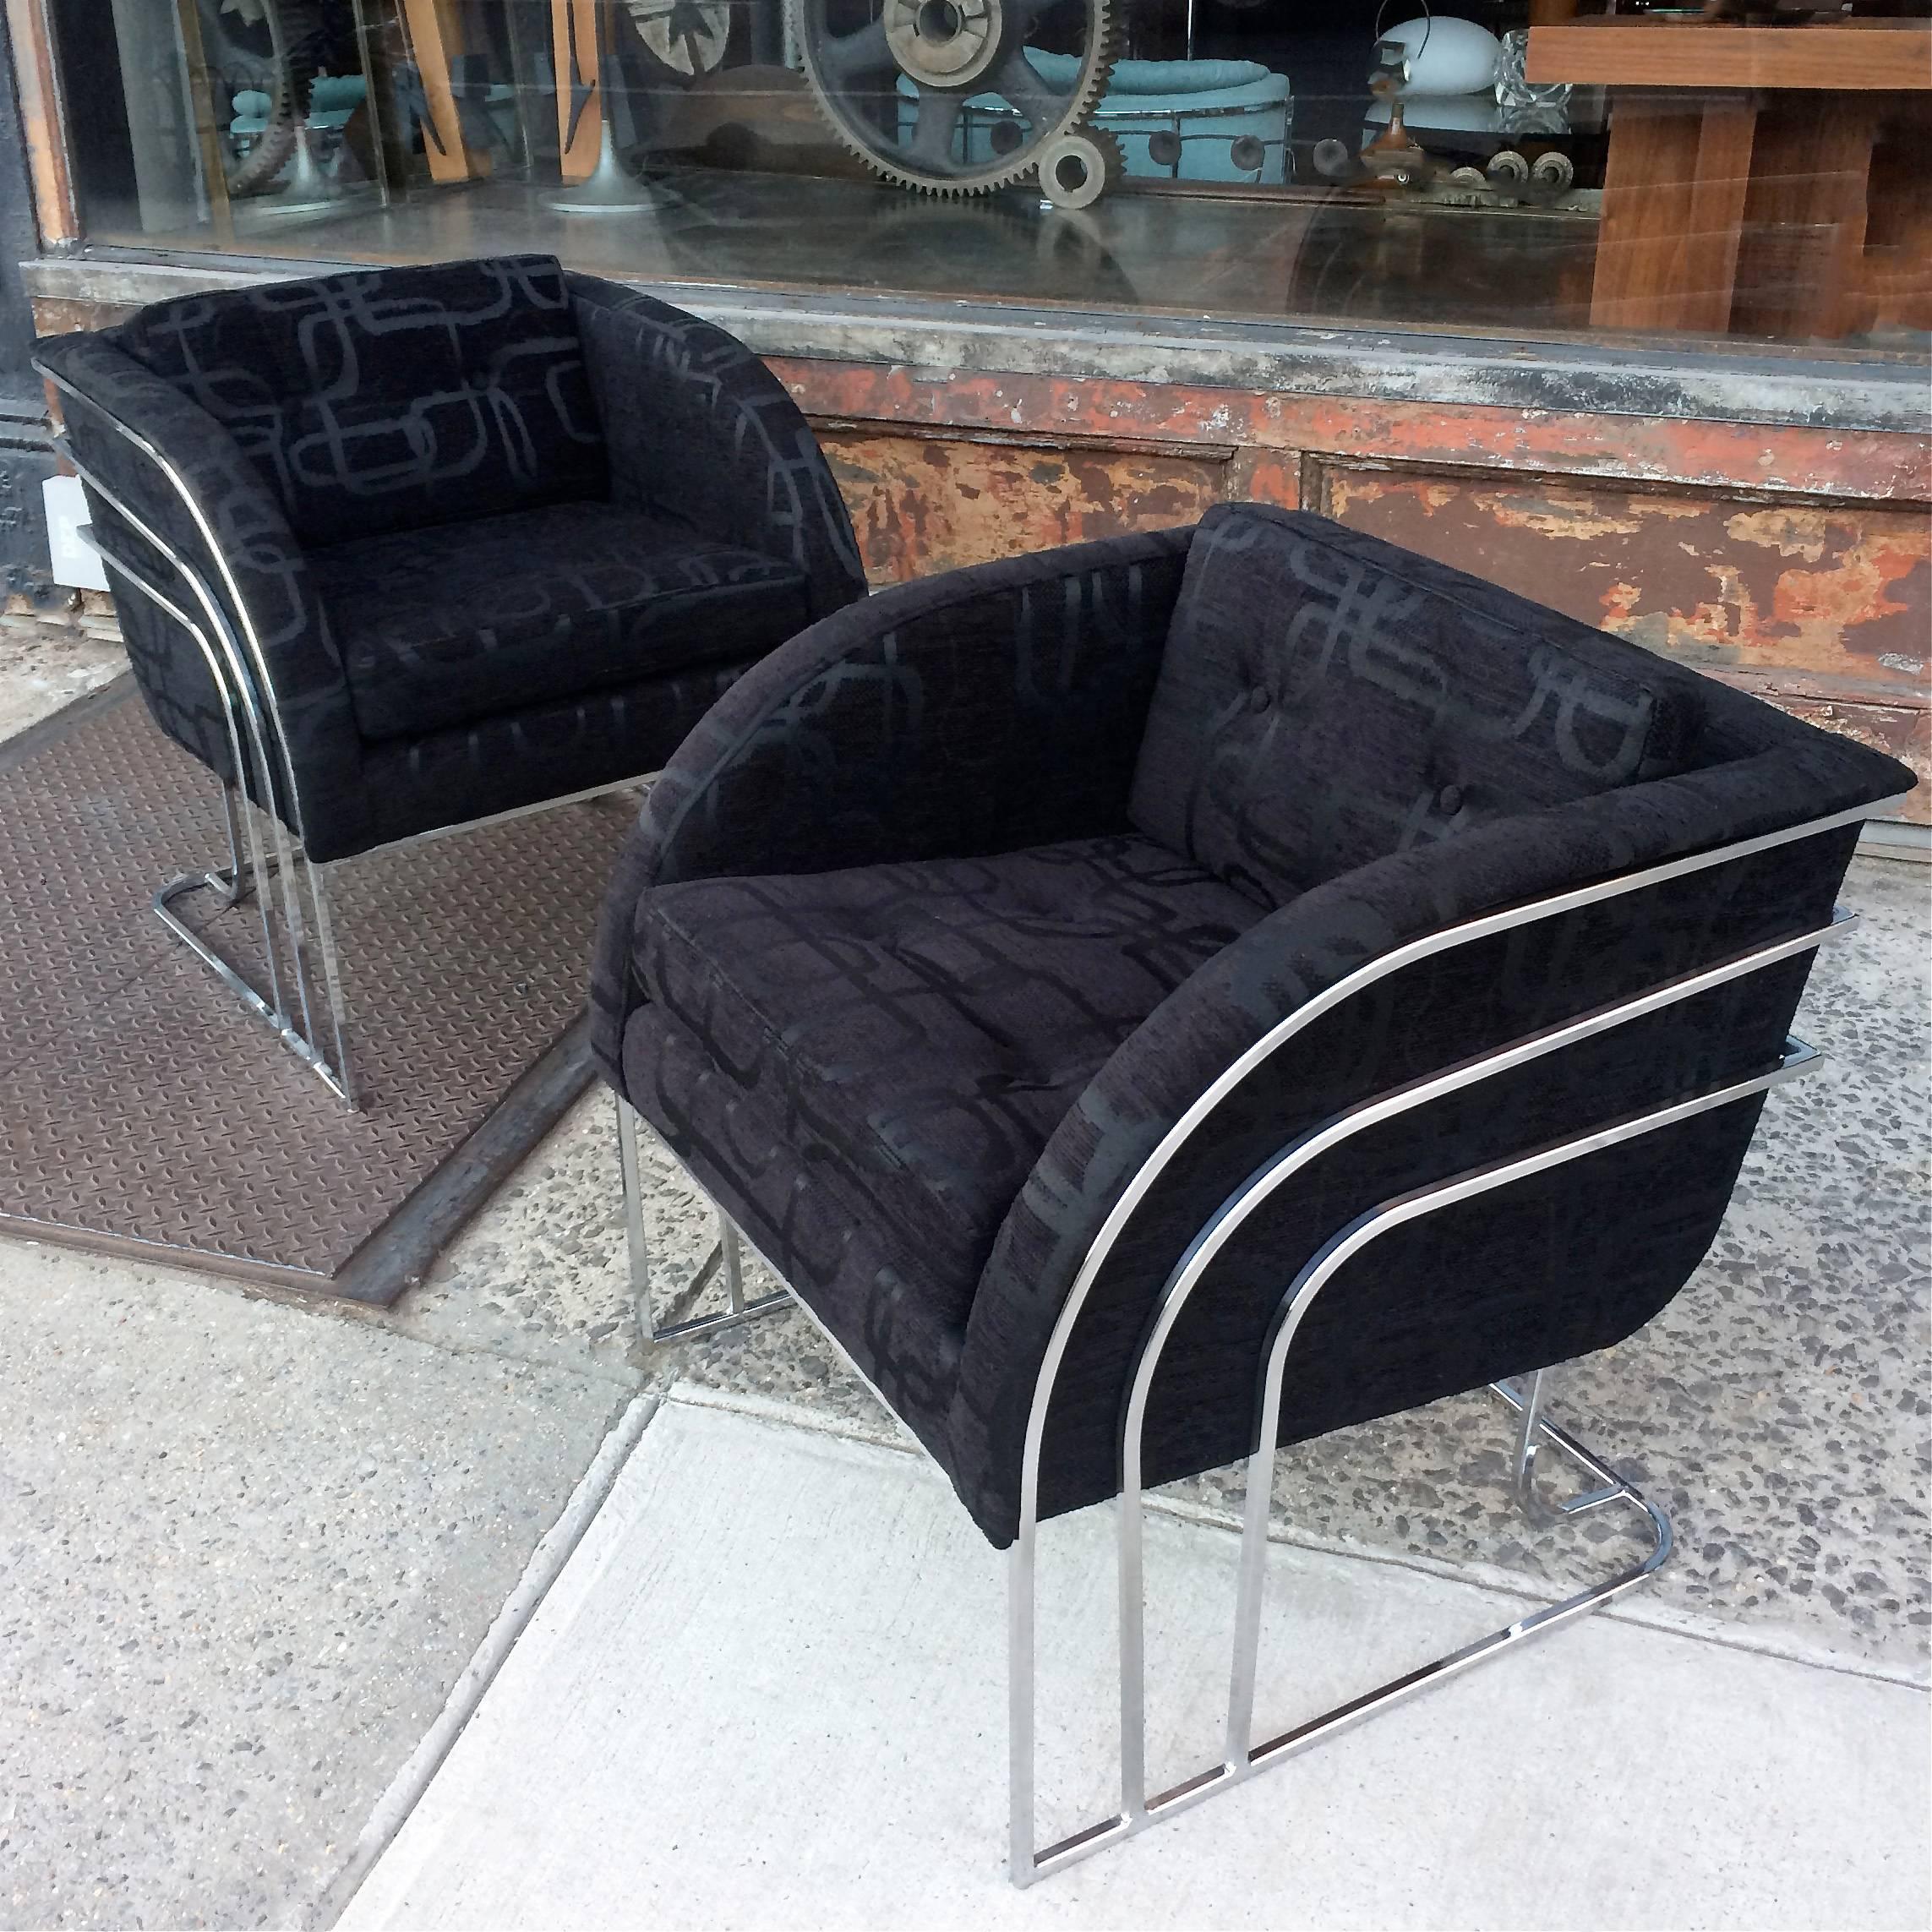 Pair of chrome frame lounge chairs by Milo Baughman for Thayer Coggin are newly upholstered in striking black jacquard.